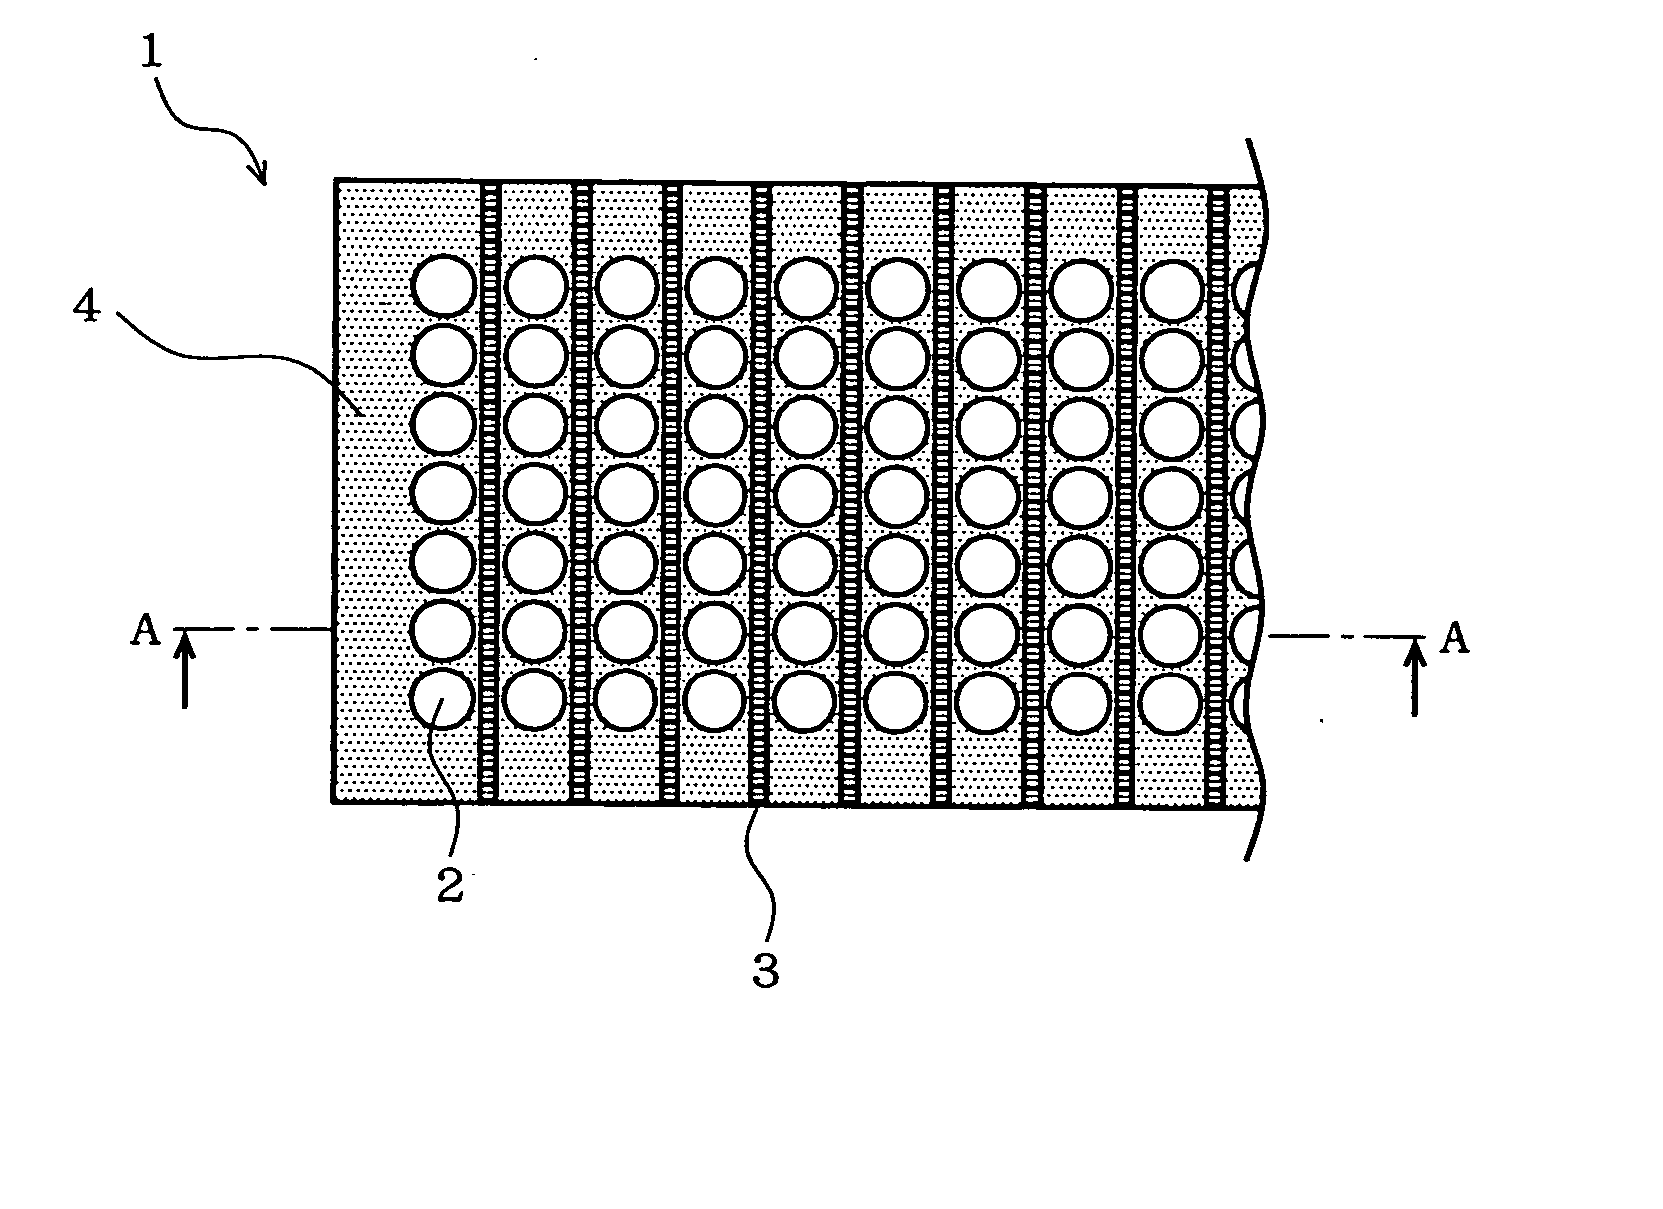 Lens plate, method for manufacturing the same and image transfer device